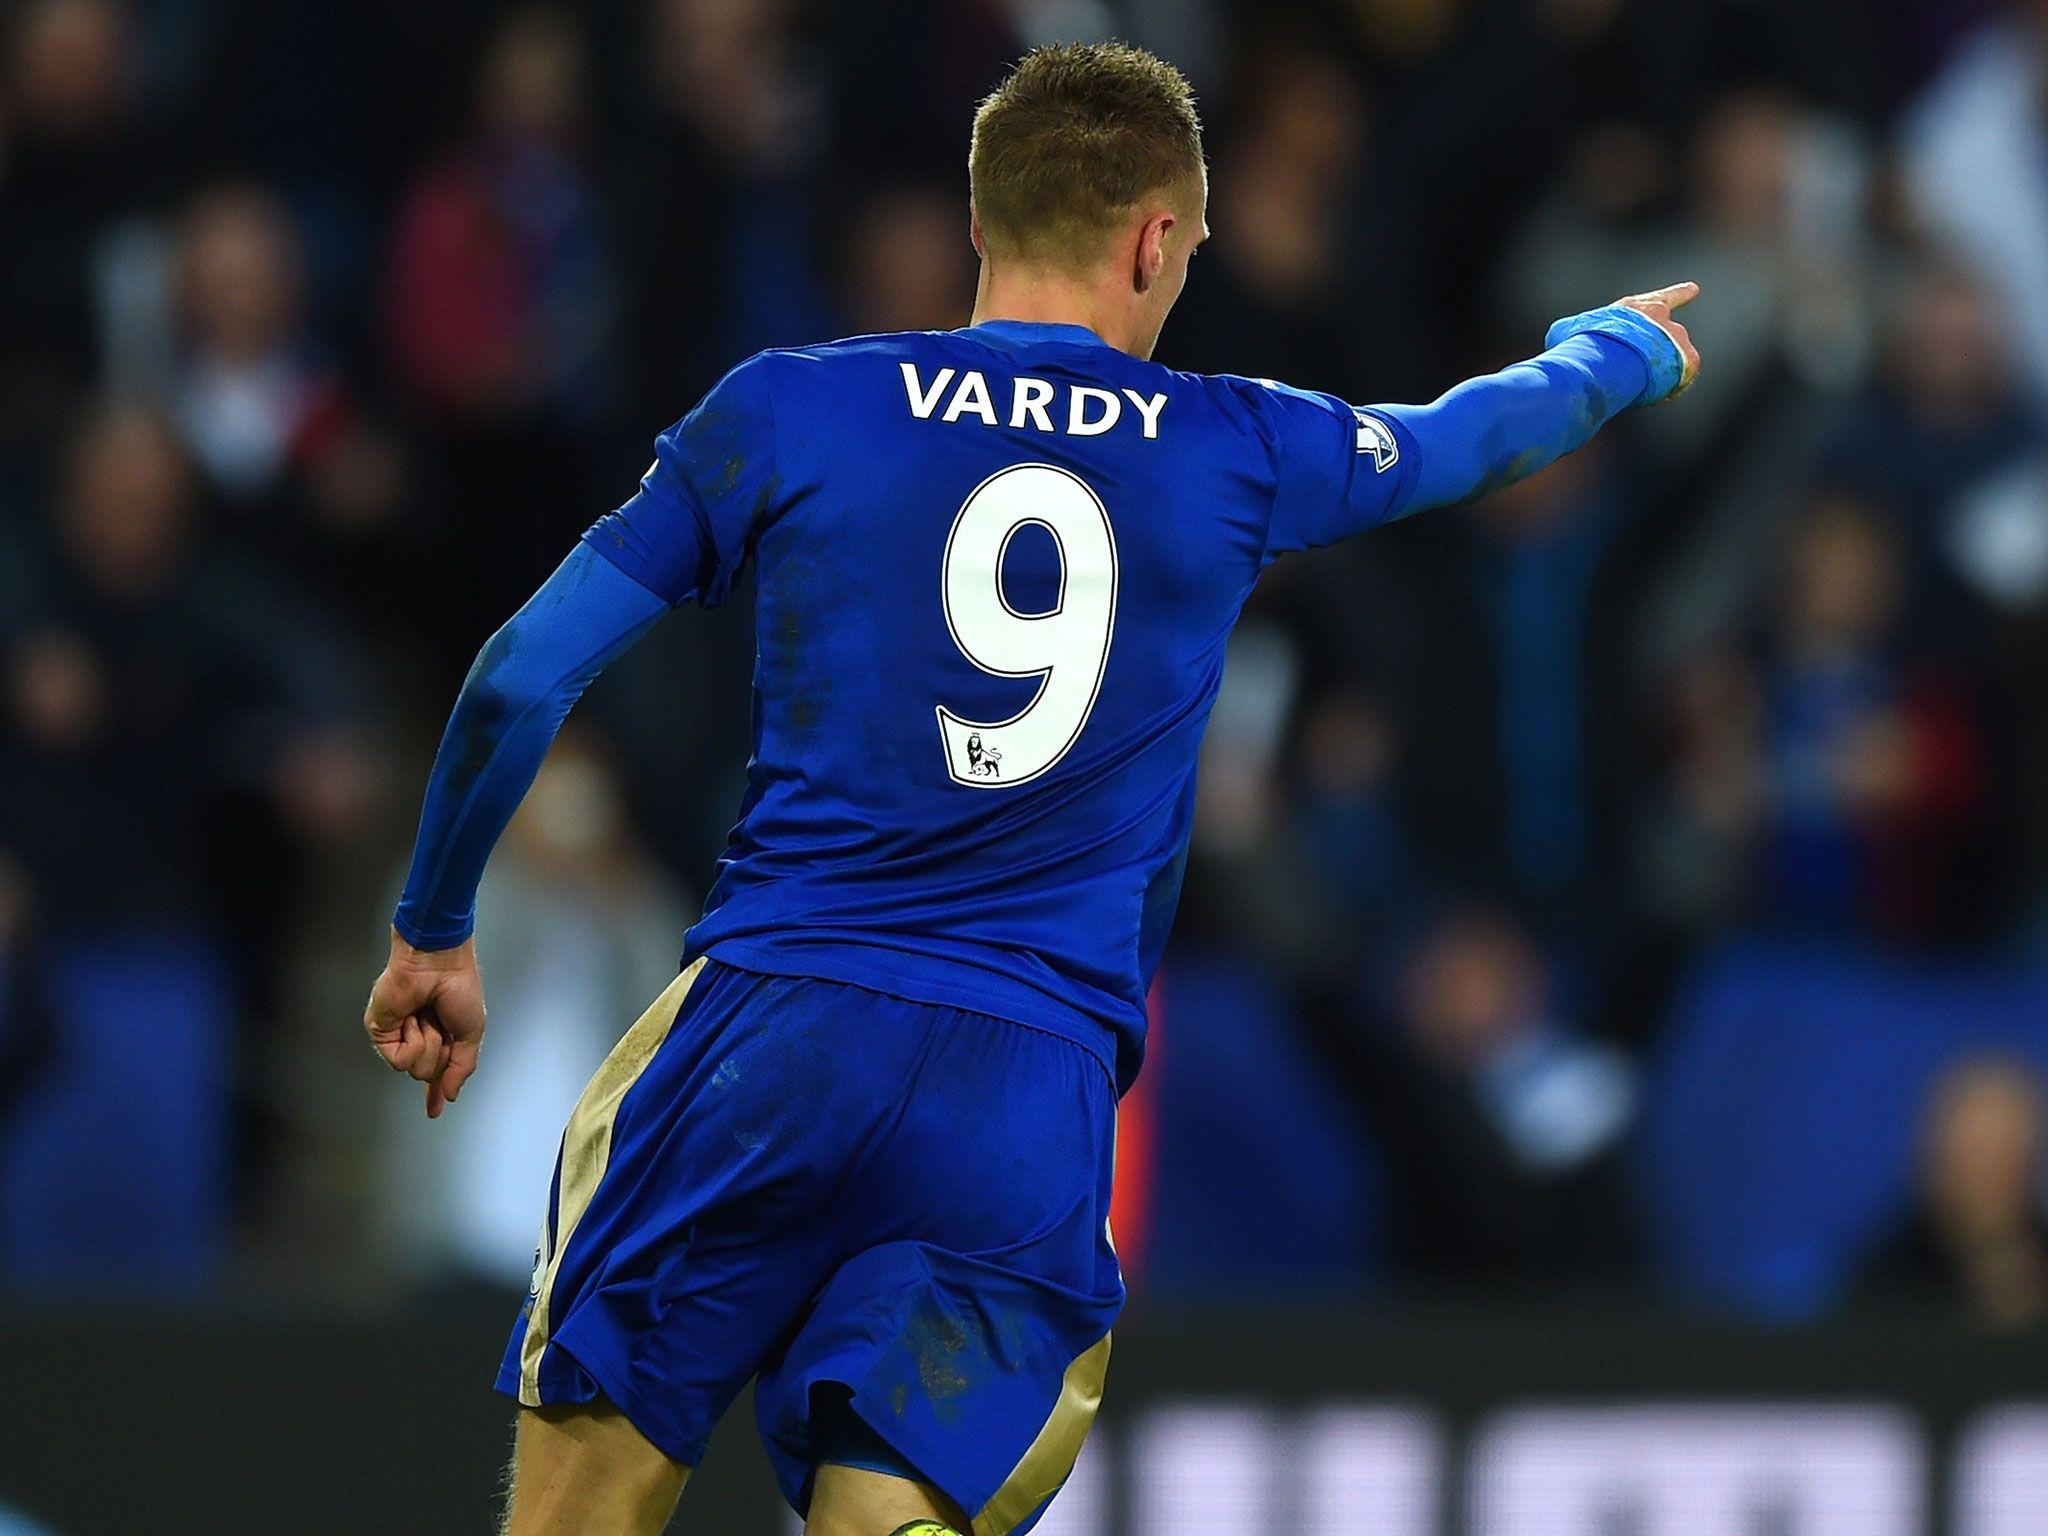 Newcastle United vs Leicester City preview: Jamie Vardy hoping to